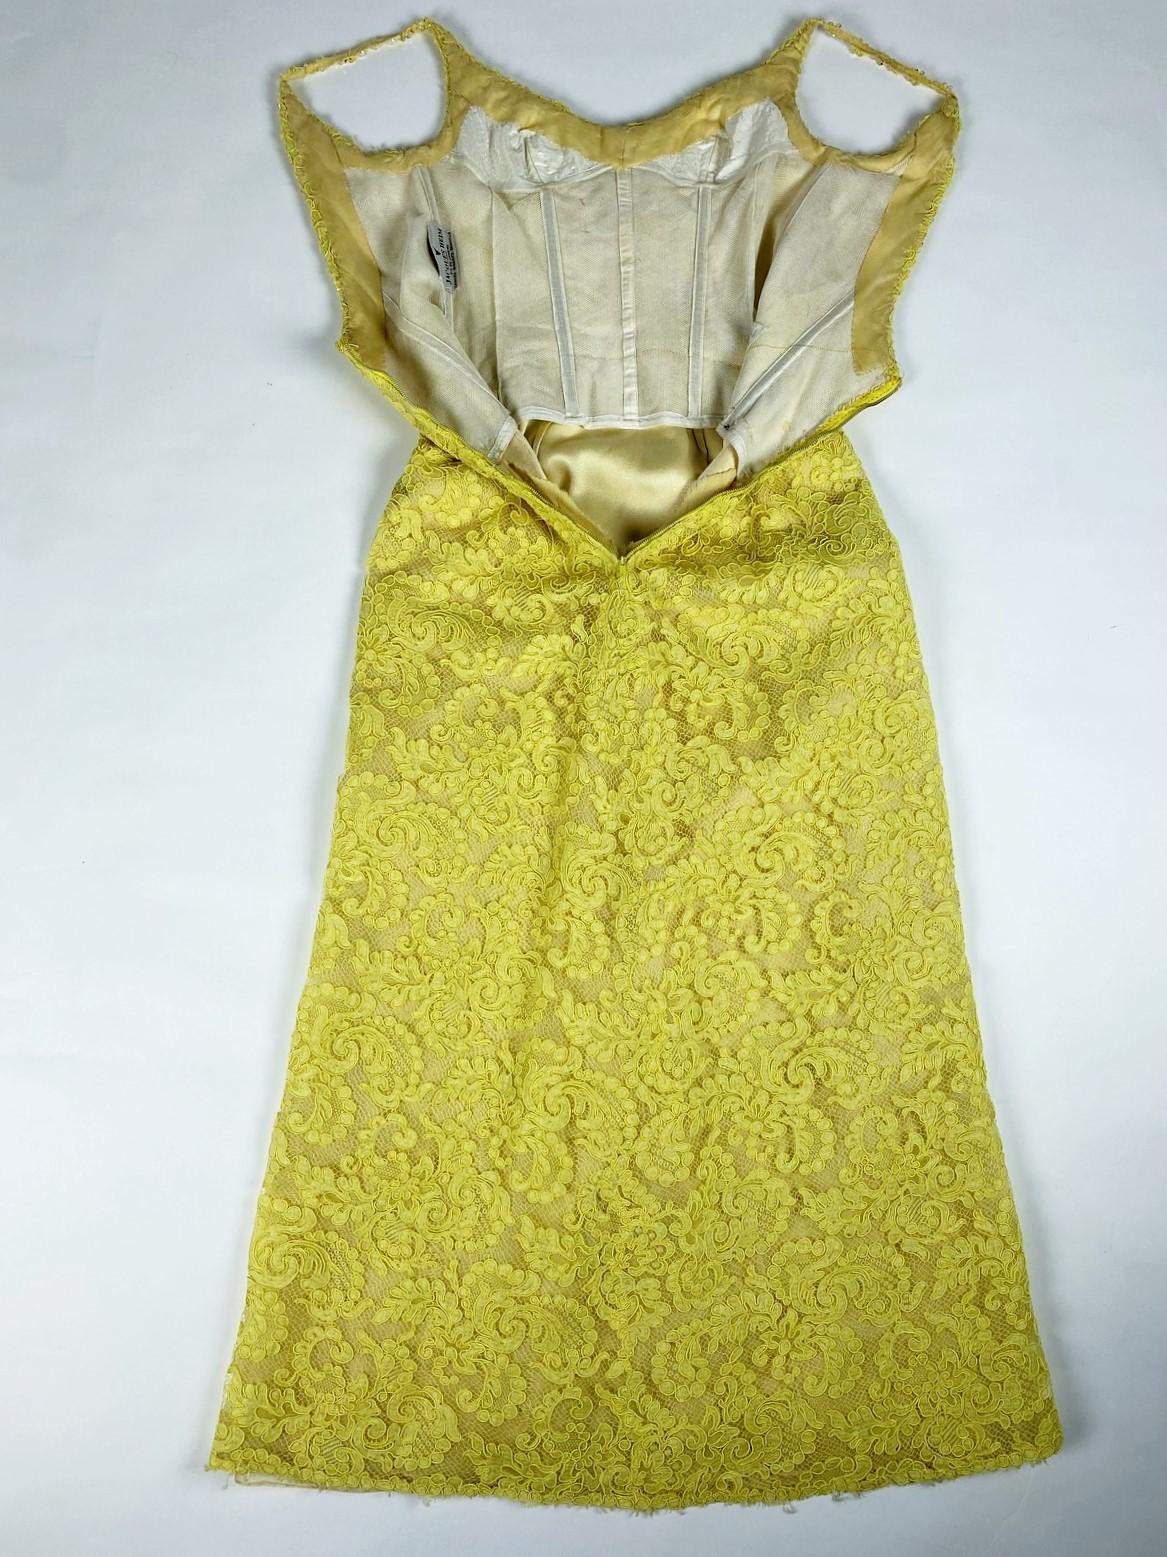 Women's A Yellow Lace Dress with Ostrich Feathers by Jacques Heim Couture Circa 1965 For Sale